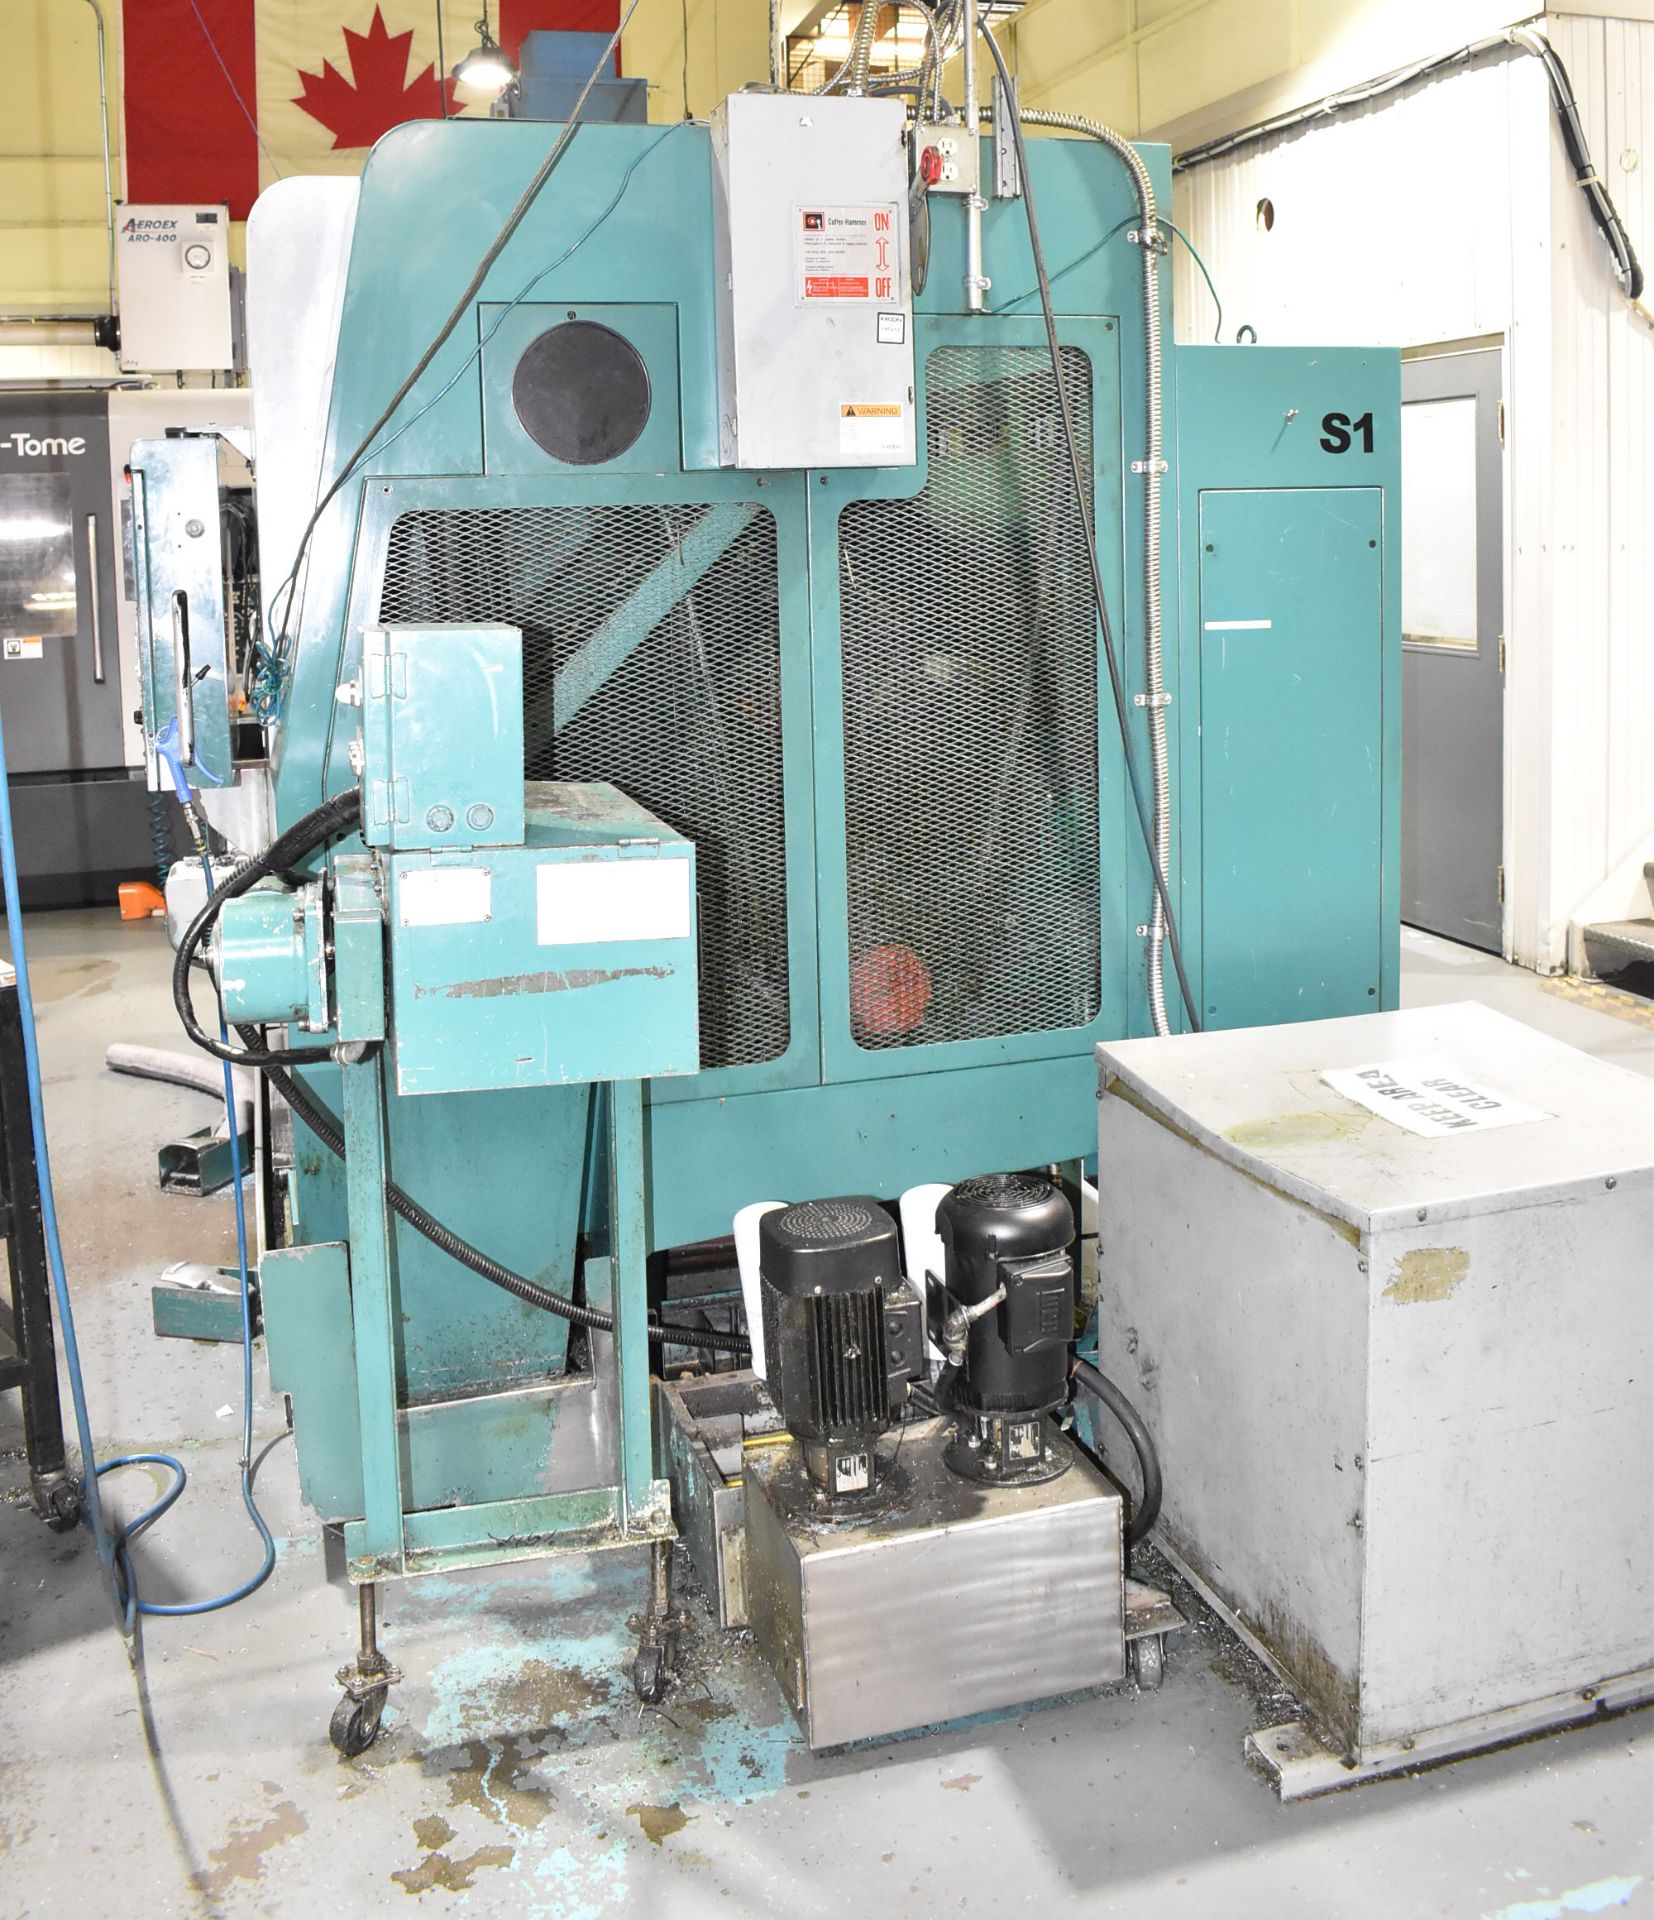 NAKAMURA-TOME WT-250 MULTI-AXIS OPPOSED SPINDLE AND TWIN TURRET CNC MULTI-TASKING CENTER WITH - Image 11 of 14